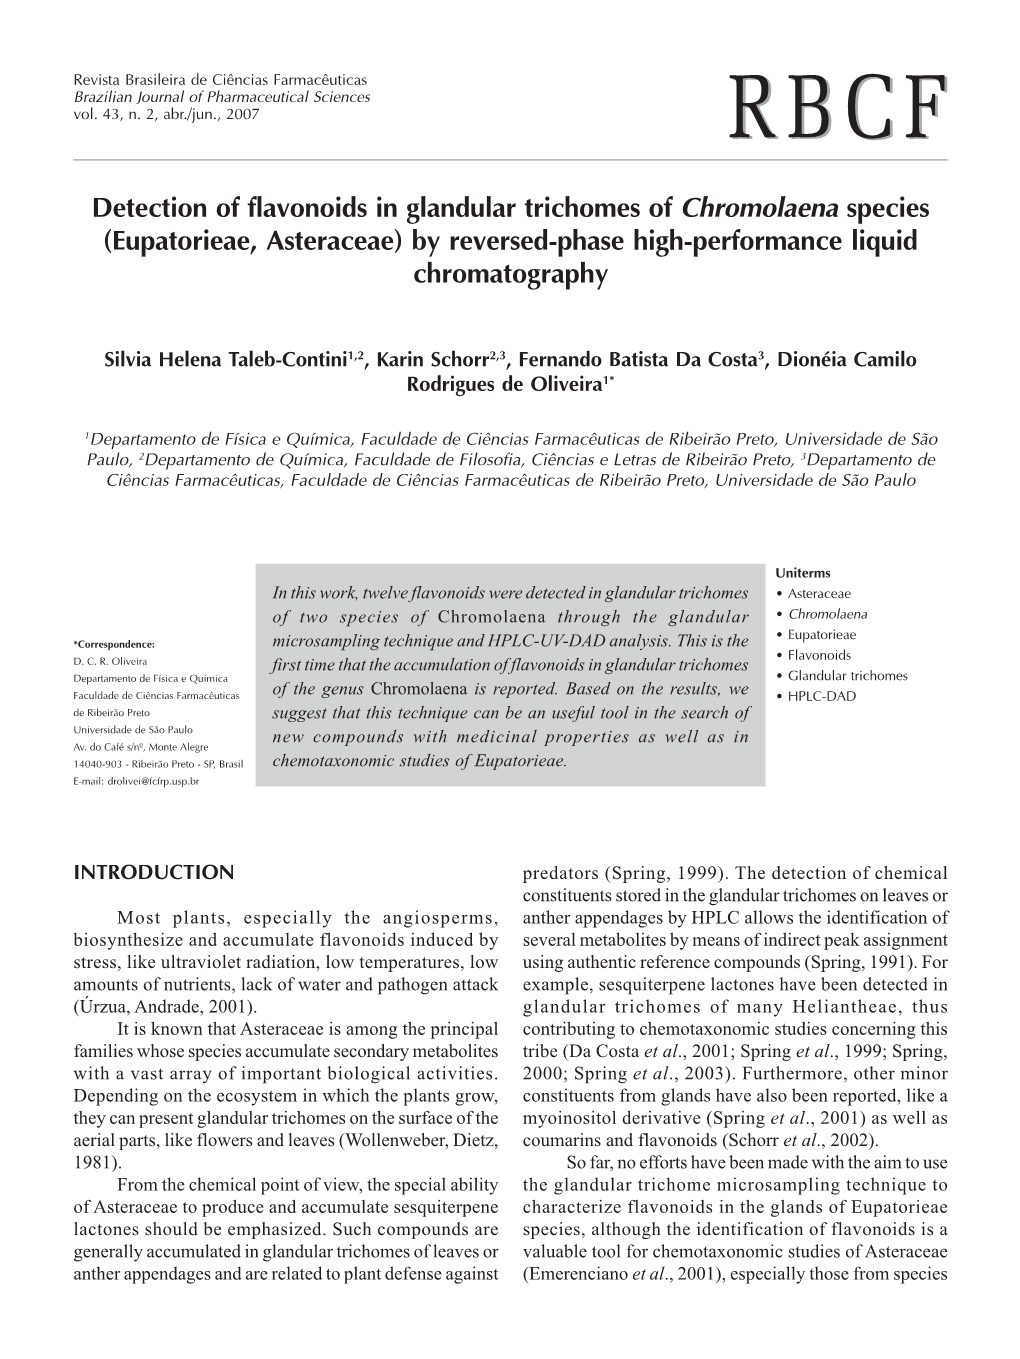 Detection of Flavonoids in Glandular Trichomes of Chromolaena Species (Eupatorieae, Asteraceae) by Reversed-Phase High-Performance Liquid Chromatography